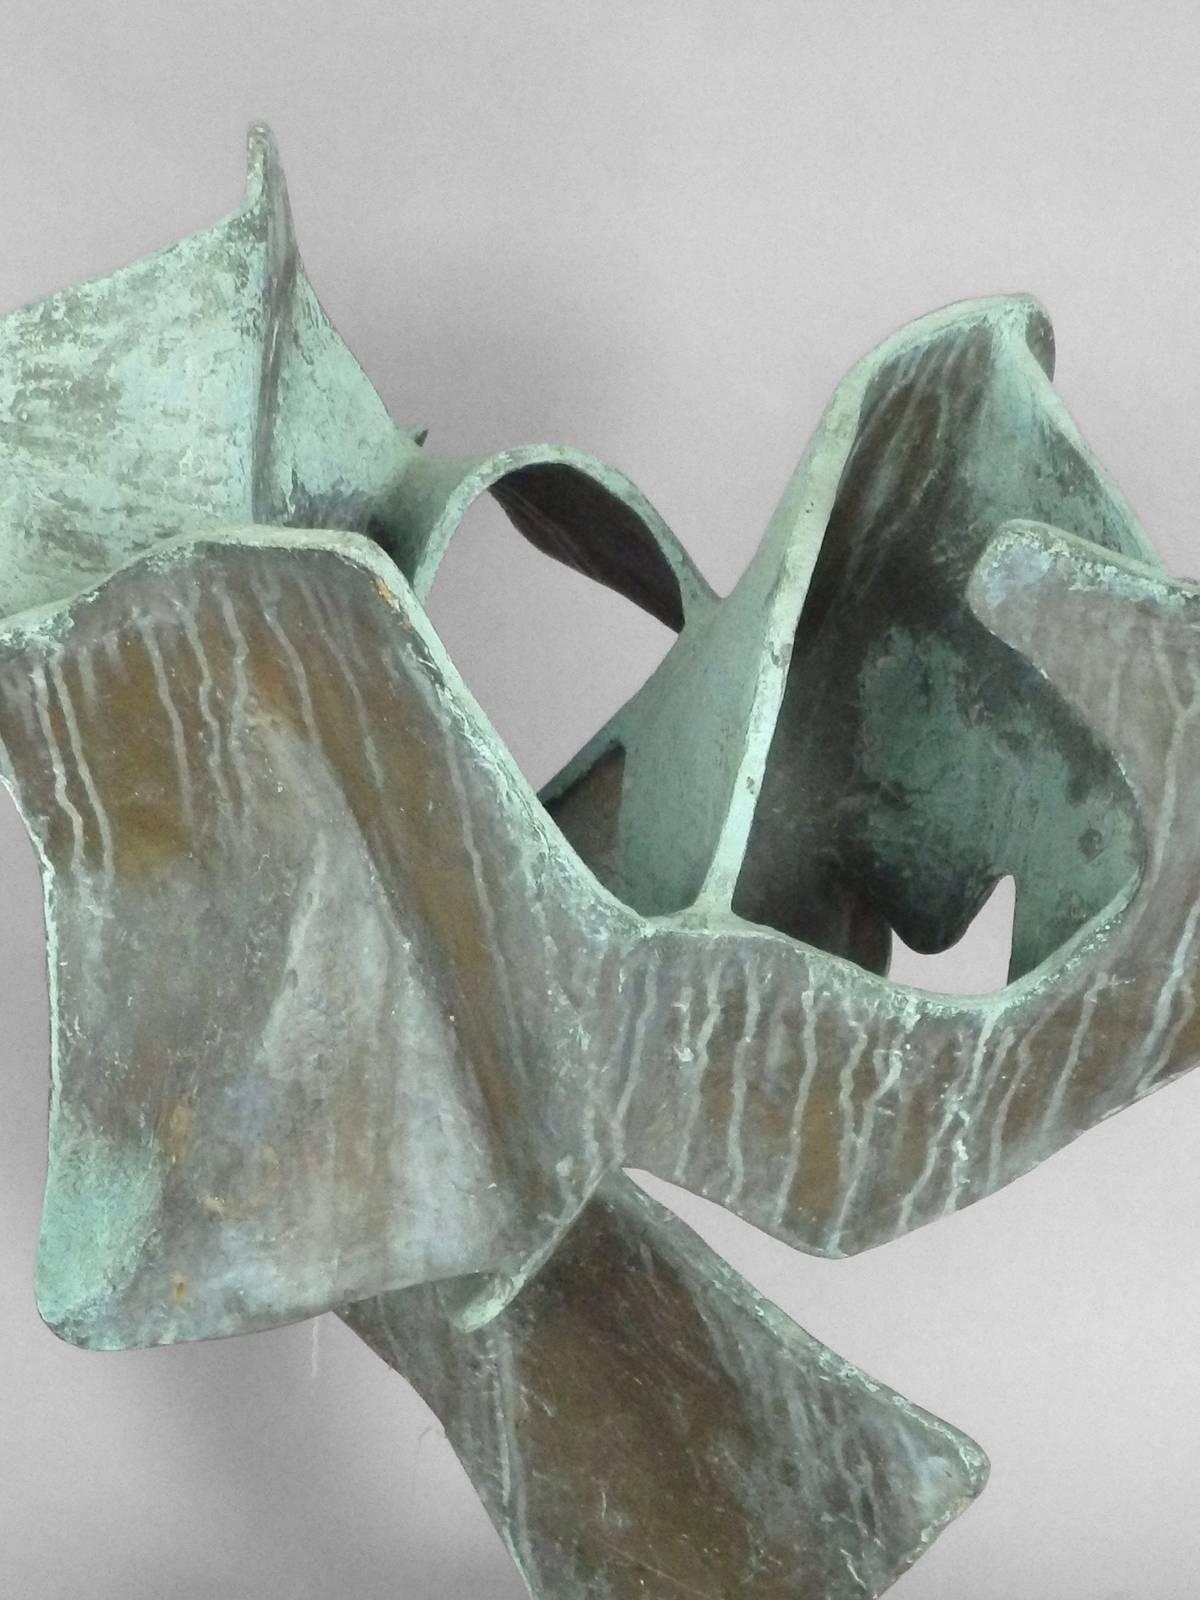  This beautifully cast and nicely patina'd bronze organic form sculpture is large and heavy . Artist William Josef, student of Josef Albers and Buckminster Fuller at Black Mountain College N.C.
Measure: Base 15 wide x 15 deep x 4 tall.